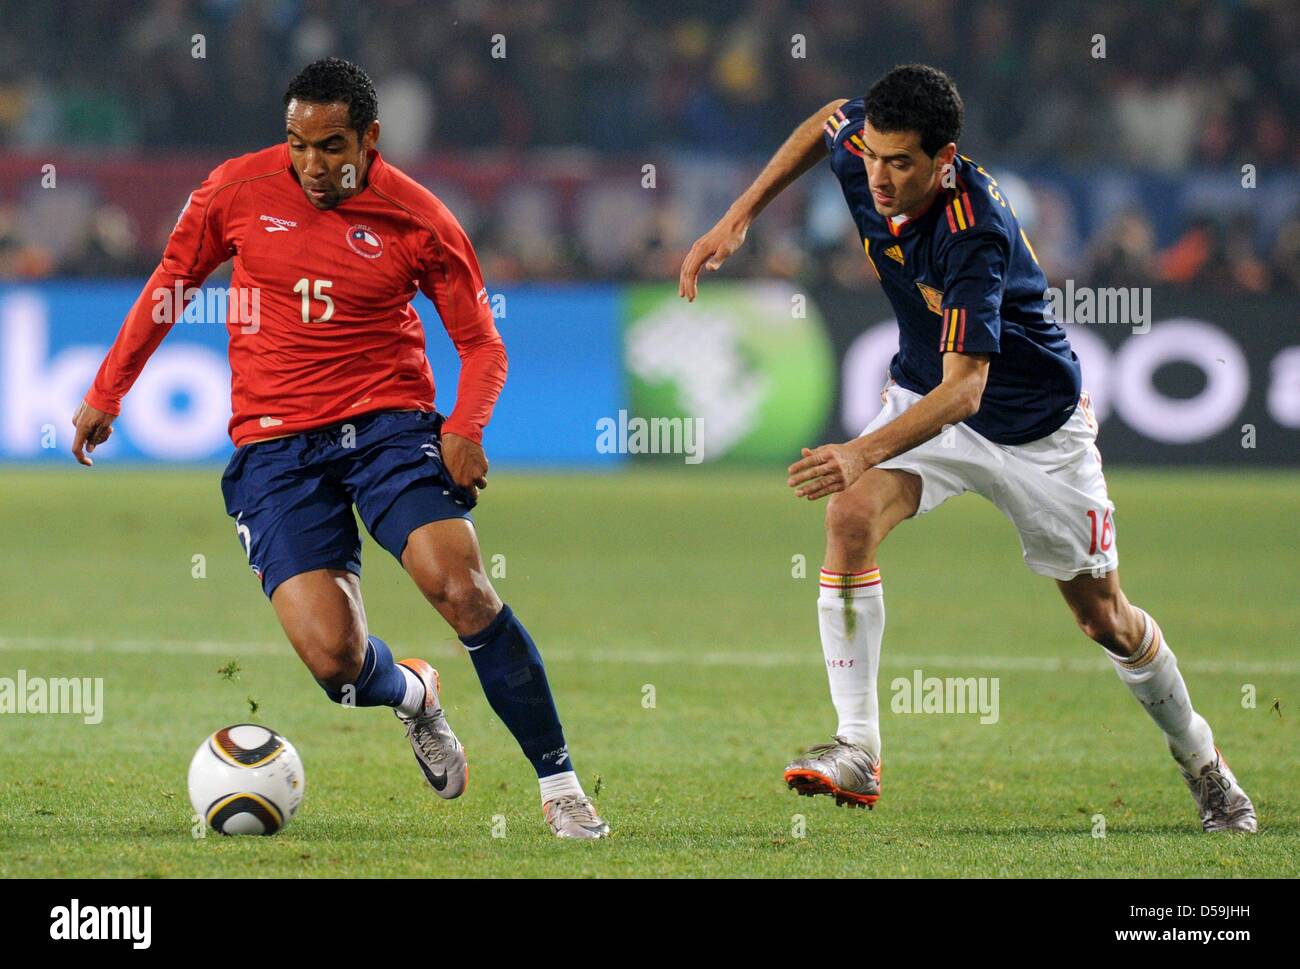 Jean Beausejour (L) of Chile vies with Sergio Busquets of Spain during the FIFA World Cup 2010 group H match between Chile and Spain at the Loftus Versfeld Stadium in Pretoria, South Africa 25 June 2010. Photo: Bernd Weissbrod dpa - Please refer to http://dpaq.de/FIFA-WM2010-TC Stock Photo